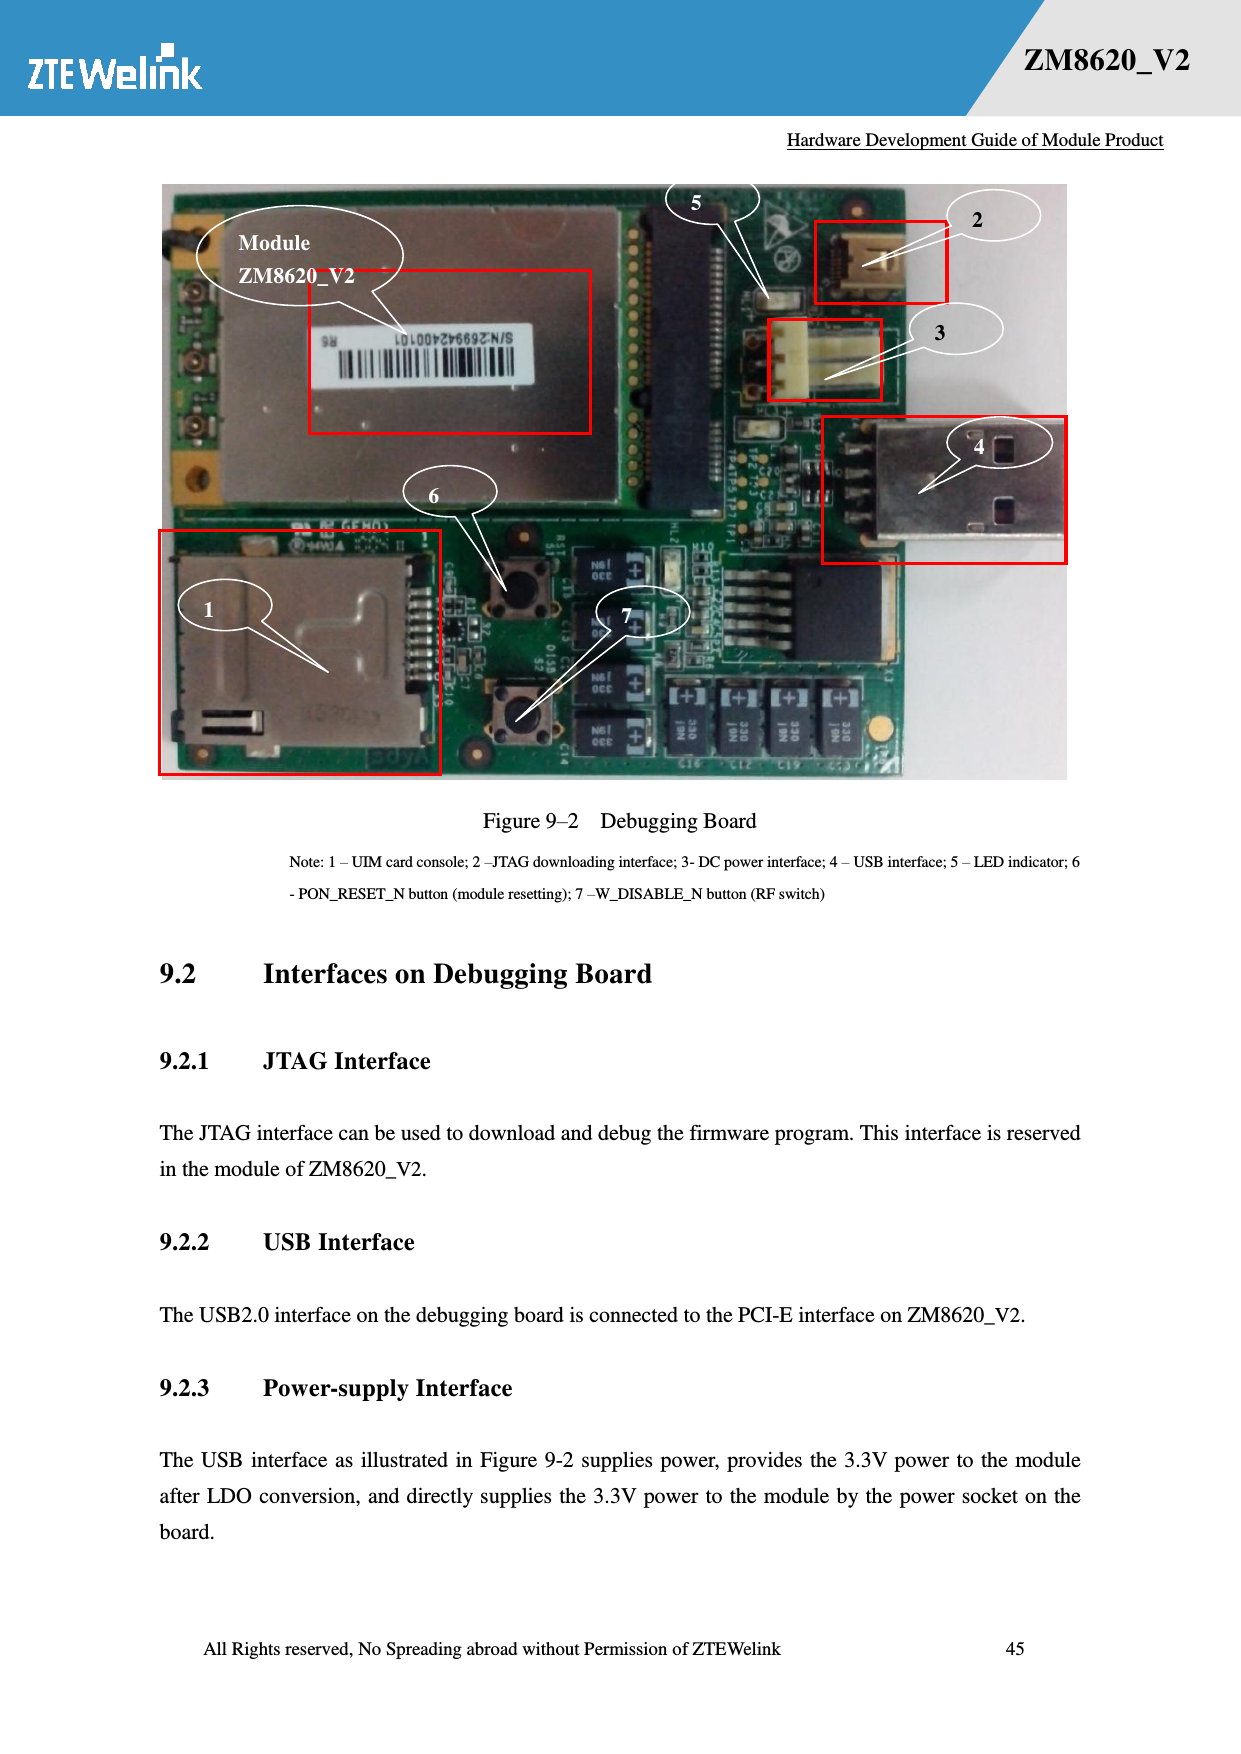   Hardware Development Guide of Module Product  All Rights reserved, No Spreading abroad without Permission of ZTEWelink              45 错误！未找到用源。    ZM8620_V2  Figure 9–2  Debugging Board Note: 1 – UIM card console; 2 –JTAG downloading interface; 3- DC power interface; 4 – USB interface; 5 – LED indicator; 6 - PON_RESET_N button (module resetting); 7 –W_DISABLE_N button (RF switch) 9.2 Interfaces on Debugging Board 9.2.1 JTAG Interface The JTAG interface can be used to download and debug the firmware program. This interface is reserved in the module of ZM8620_V2. 9.2.2 USB Interface The USB2.0 interface on the debugging board is connected to the PCI-E interface on ZM8620_V2.   9.2.3 Power-supply Interface   The USB interface as illustrated in  Figure 9-2 supplies power, provides the 3.3V power to the module after LDO conversion, and directly supplies the 3.3V power to the module by the power socket on the board. Module ZM8620_V2 1 2 3 4 5 6 7 